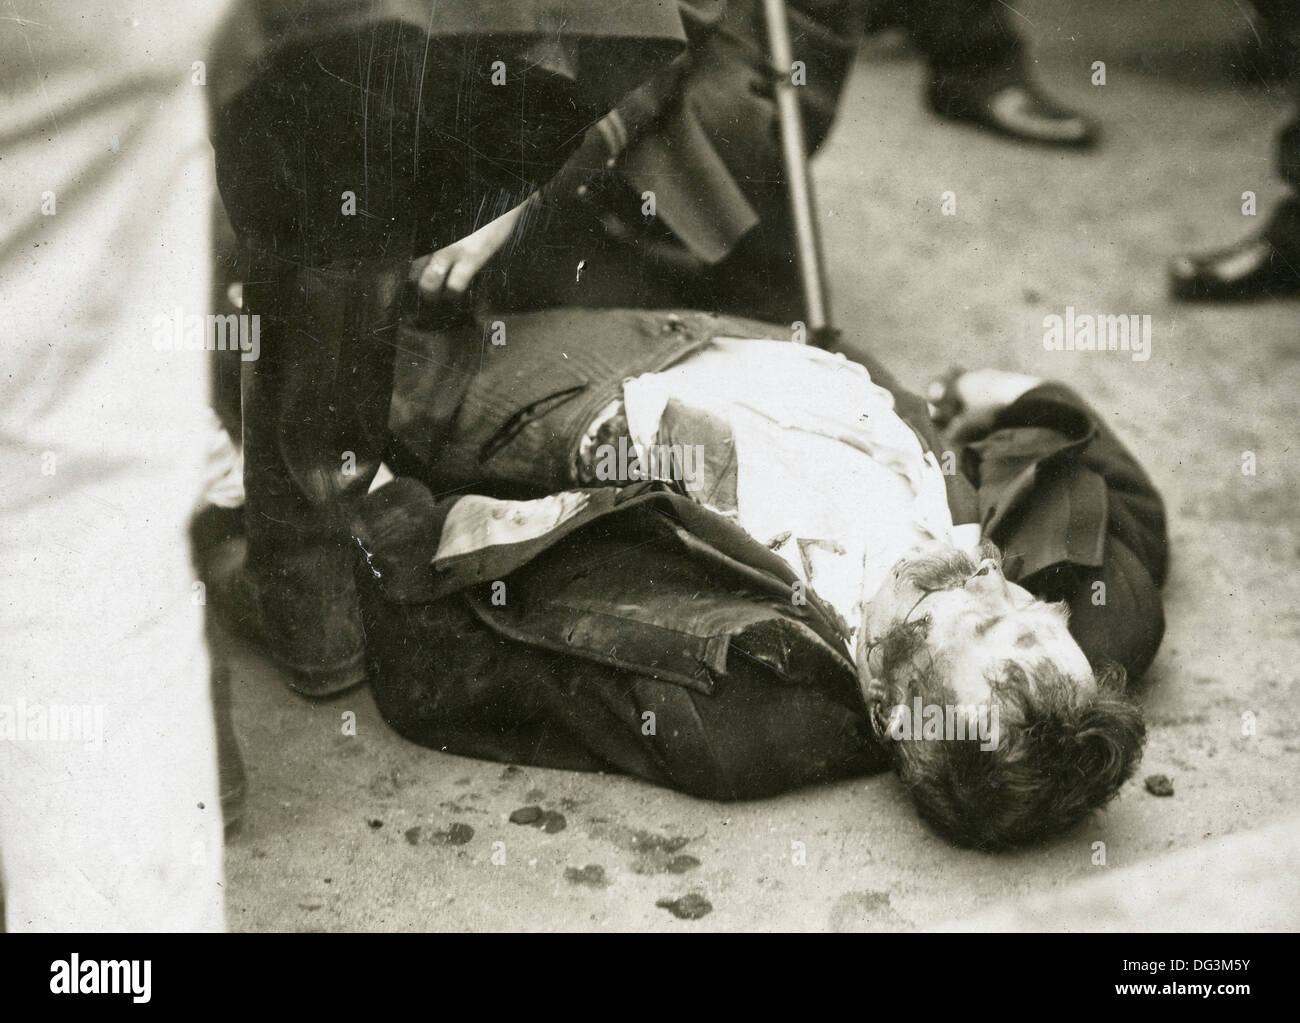 Anarchist - Man killed Union Square, New York City - March 28, 1908 Stock Photo